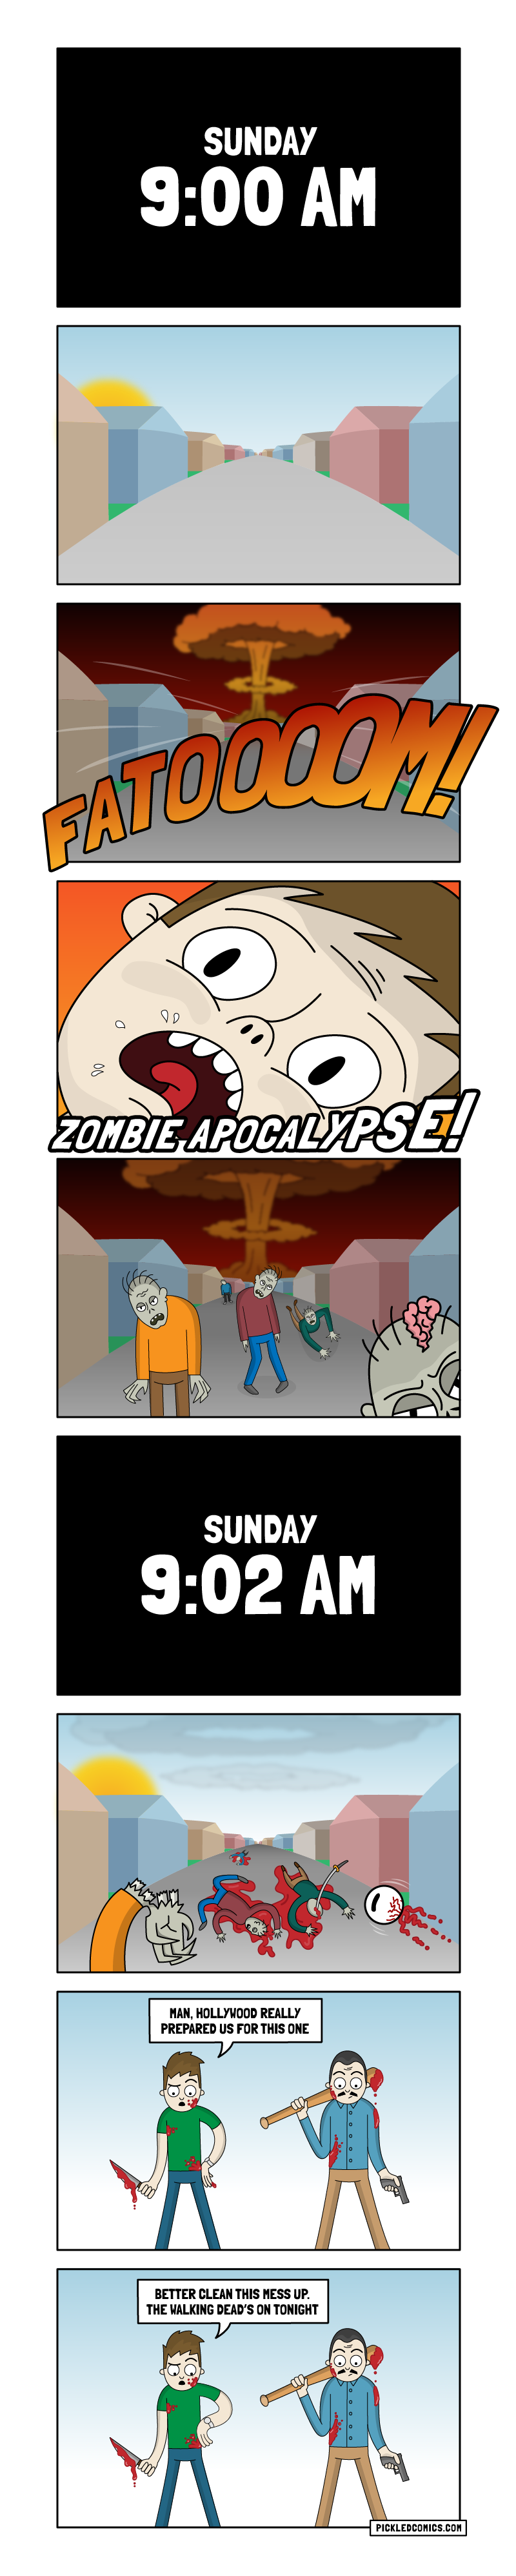 Sunday 9:00am. Fatoooom! Zombie Apocalypse! Sunday 9:02am. Man, Hollywood really prepared us for this one. Better clean this mess up. The Walking Dead's on tonight.